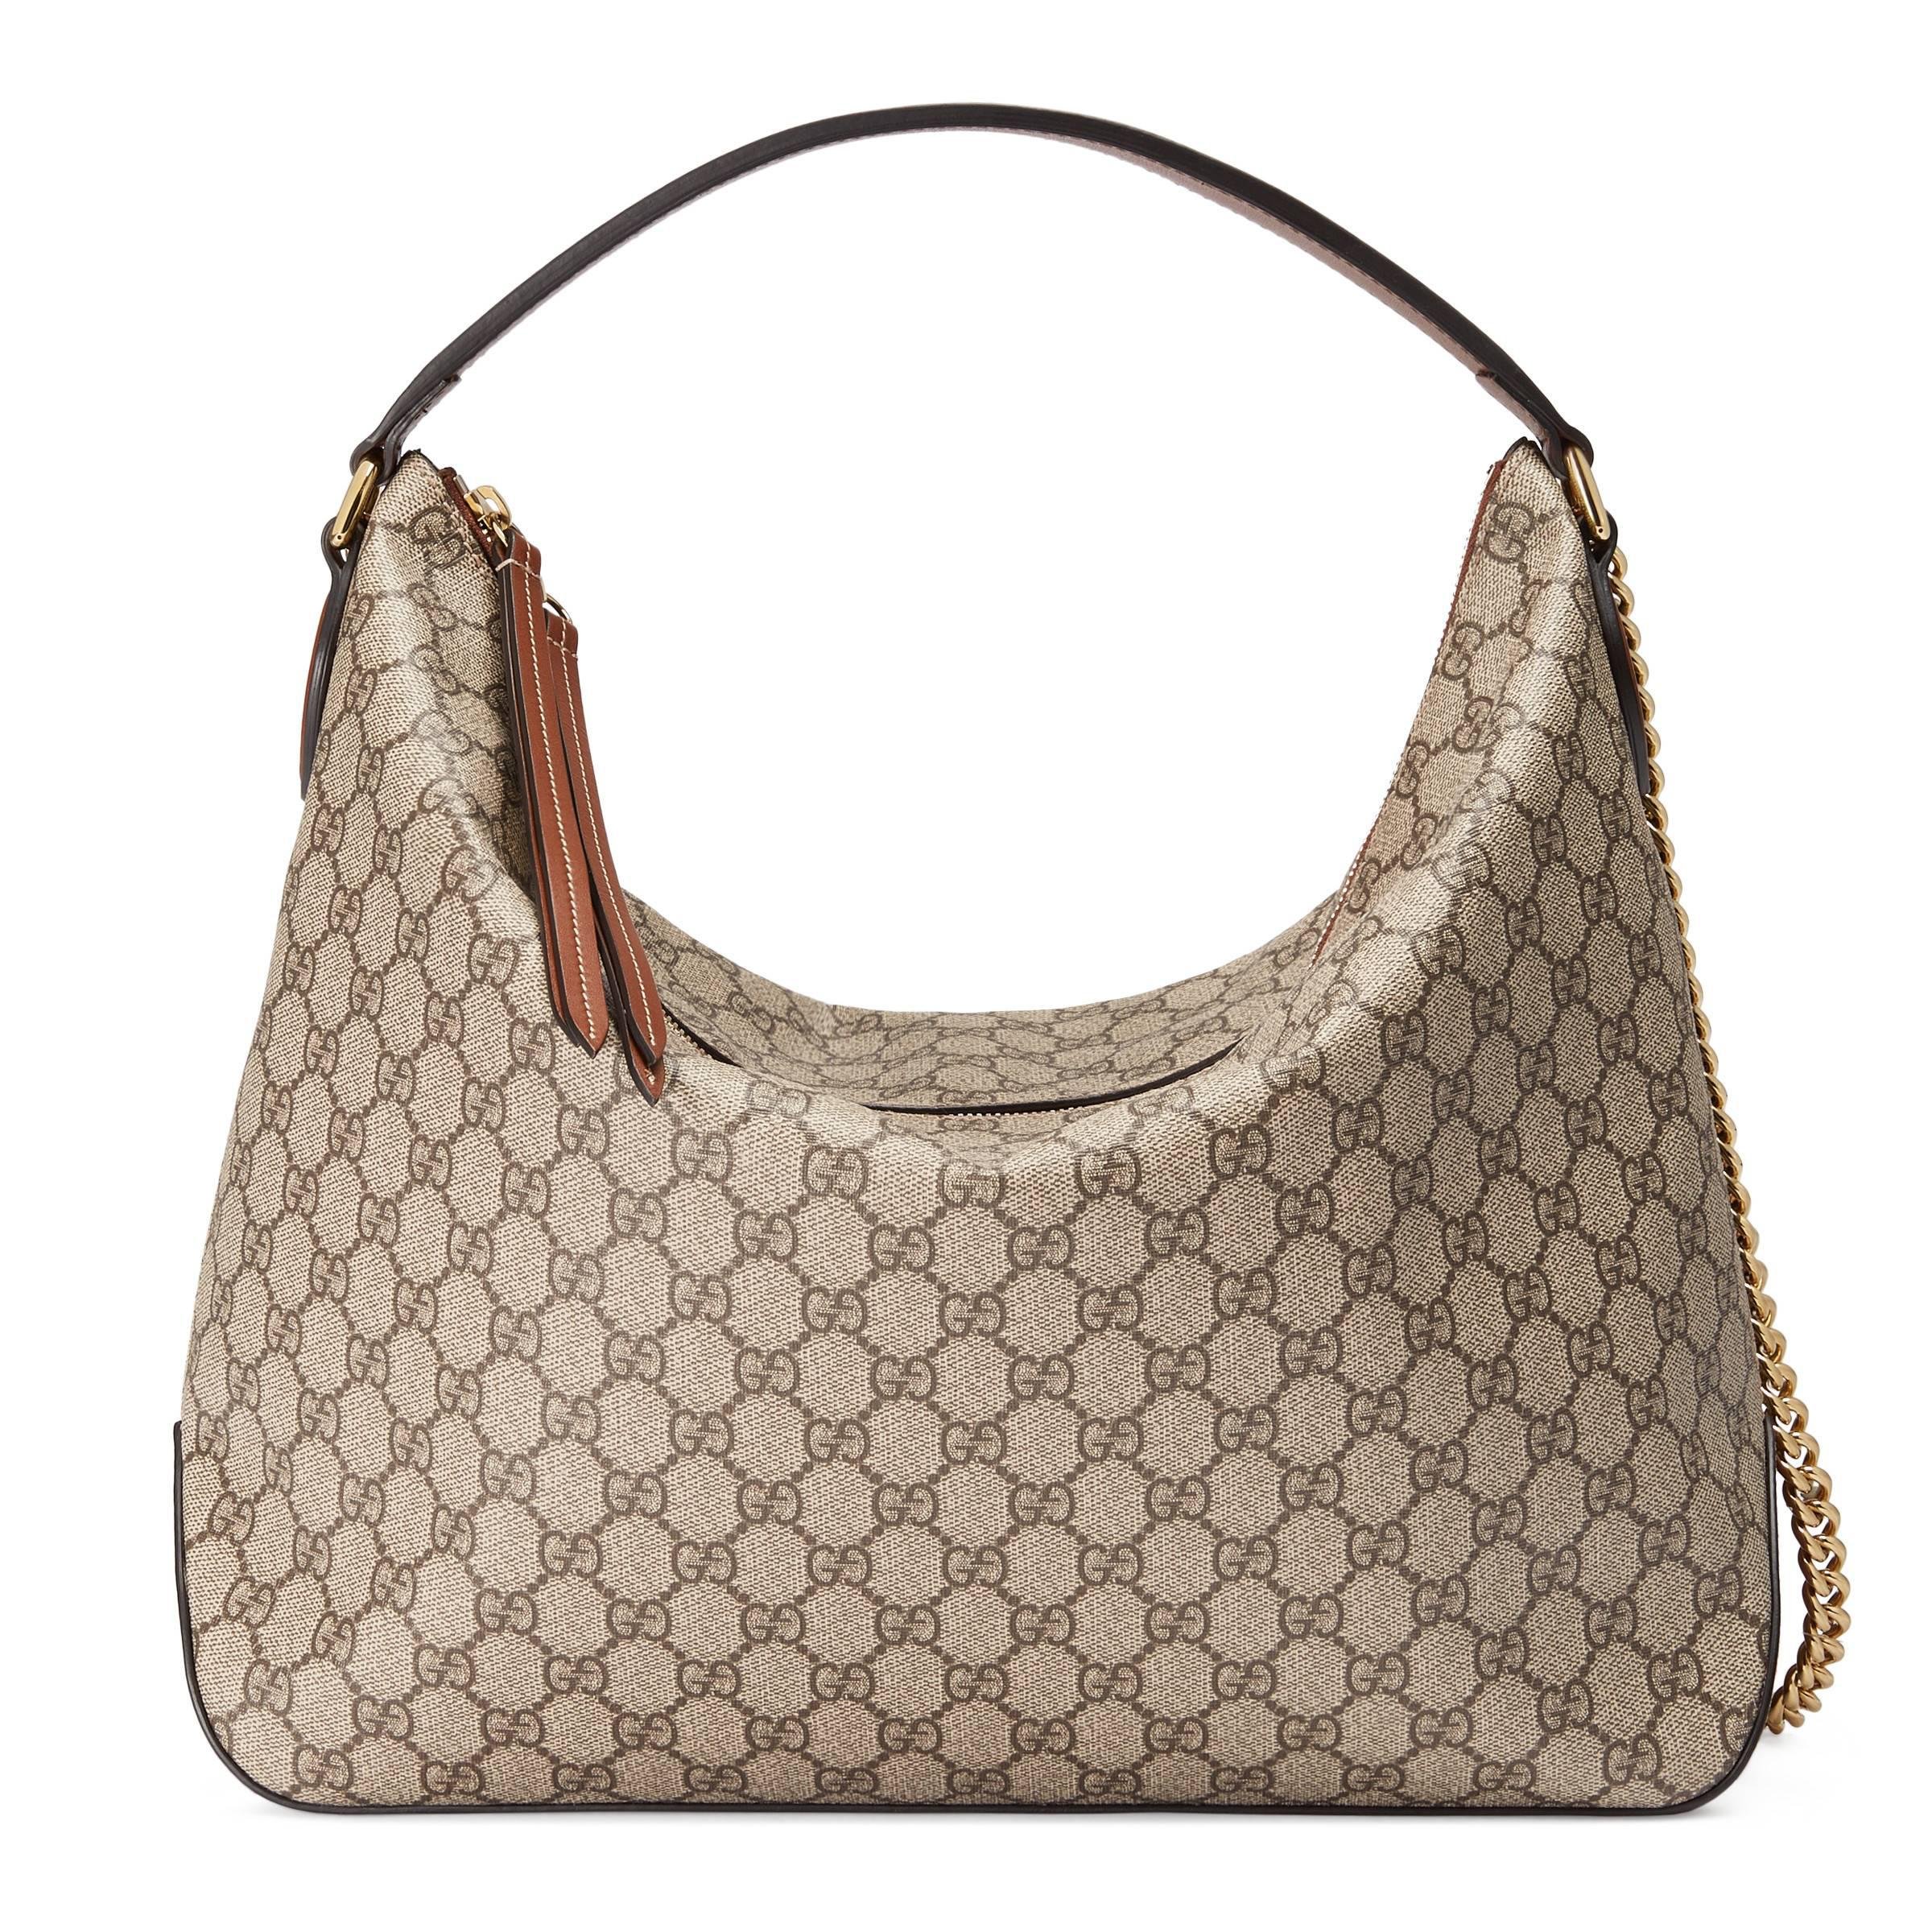 Gucci Canvas GG Supreme Large Hobo in Beige (Natural) | Lyst